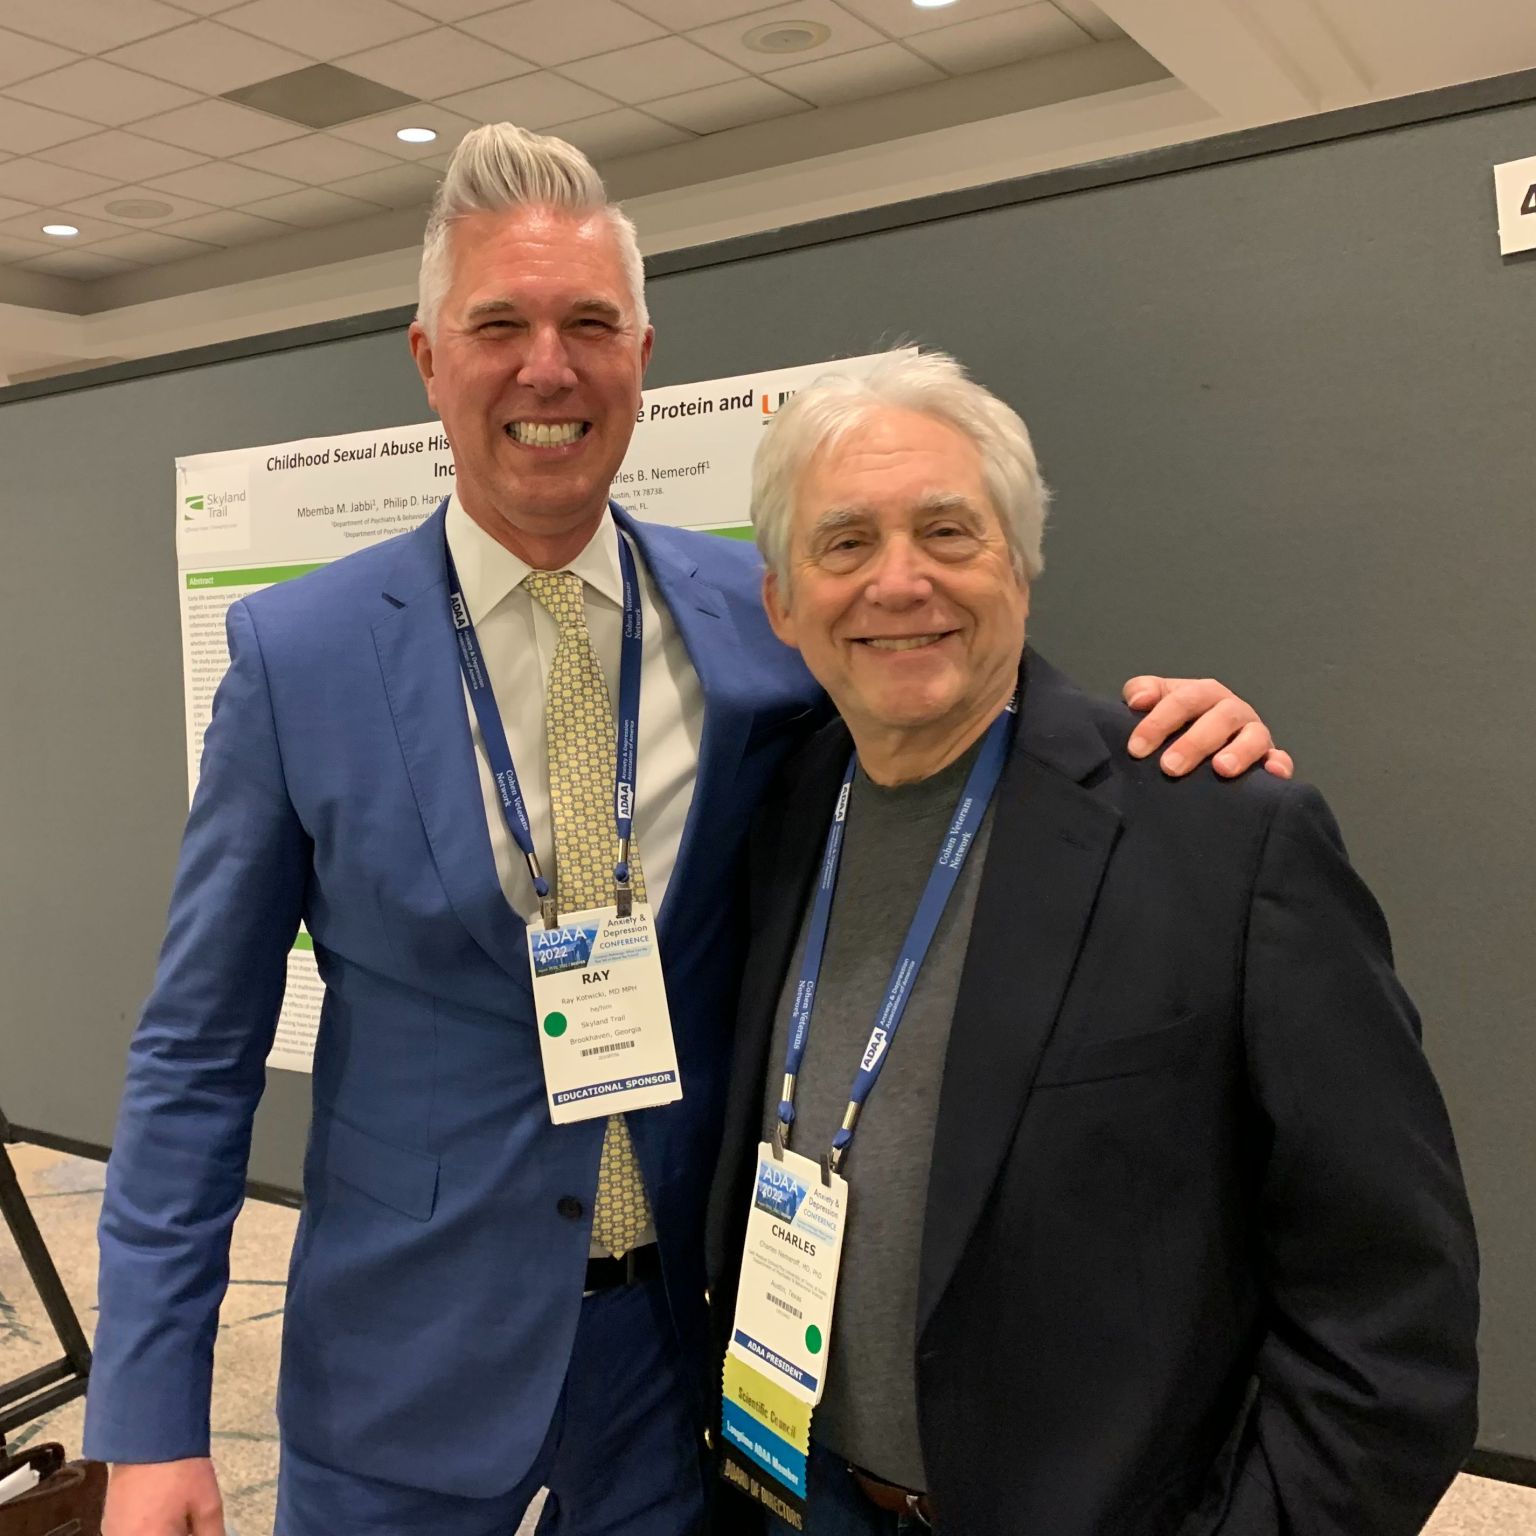 At the 2022 ADAA Conference, Skyland Trail Charles B. West Chief Medical Officer Ray Kotwicki, MD, MPH, DFAPA, presented a poster session on the relationship between childhood sexual abuse history and an increase in c-reactive proteins and body mass index. Dr. Kotwicki is pictured with Charles Nemeroff, MD, PhD, Anxiety and Depression Association of America (ADAA) President and Skyland Trail National Advisory Board co-chair.